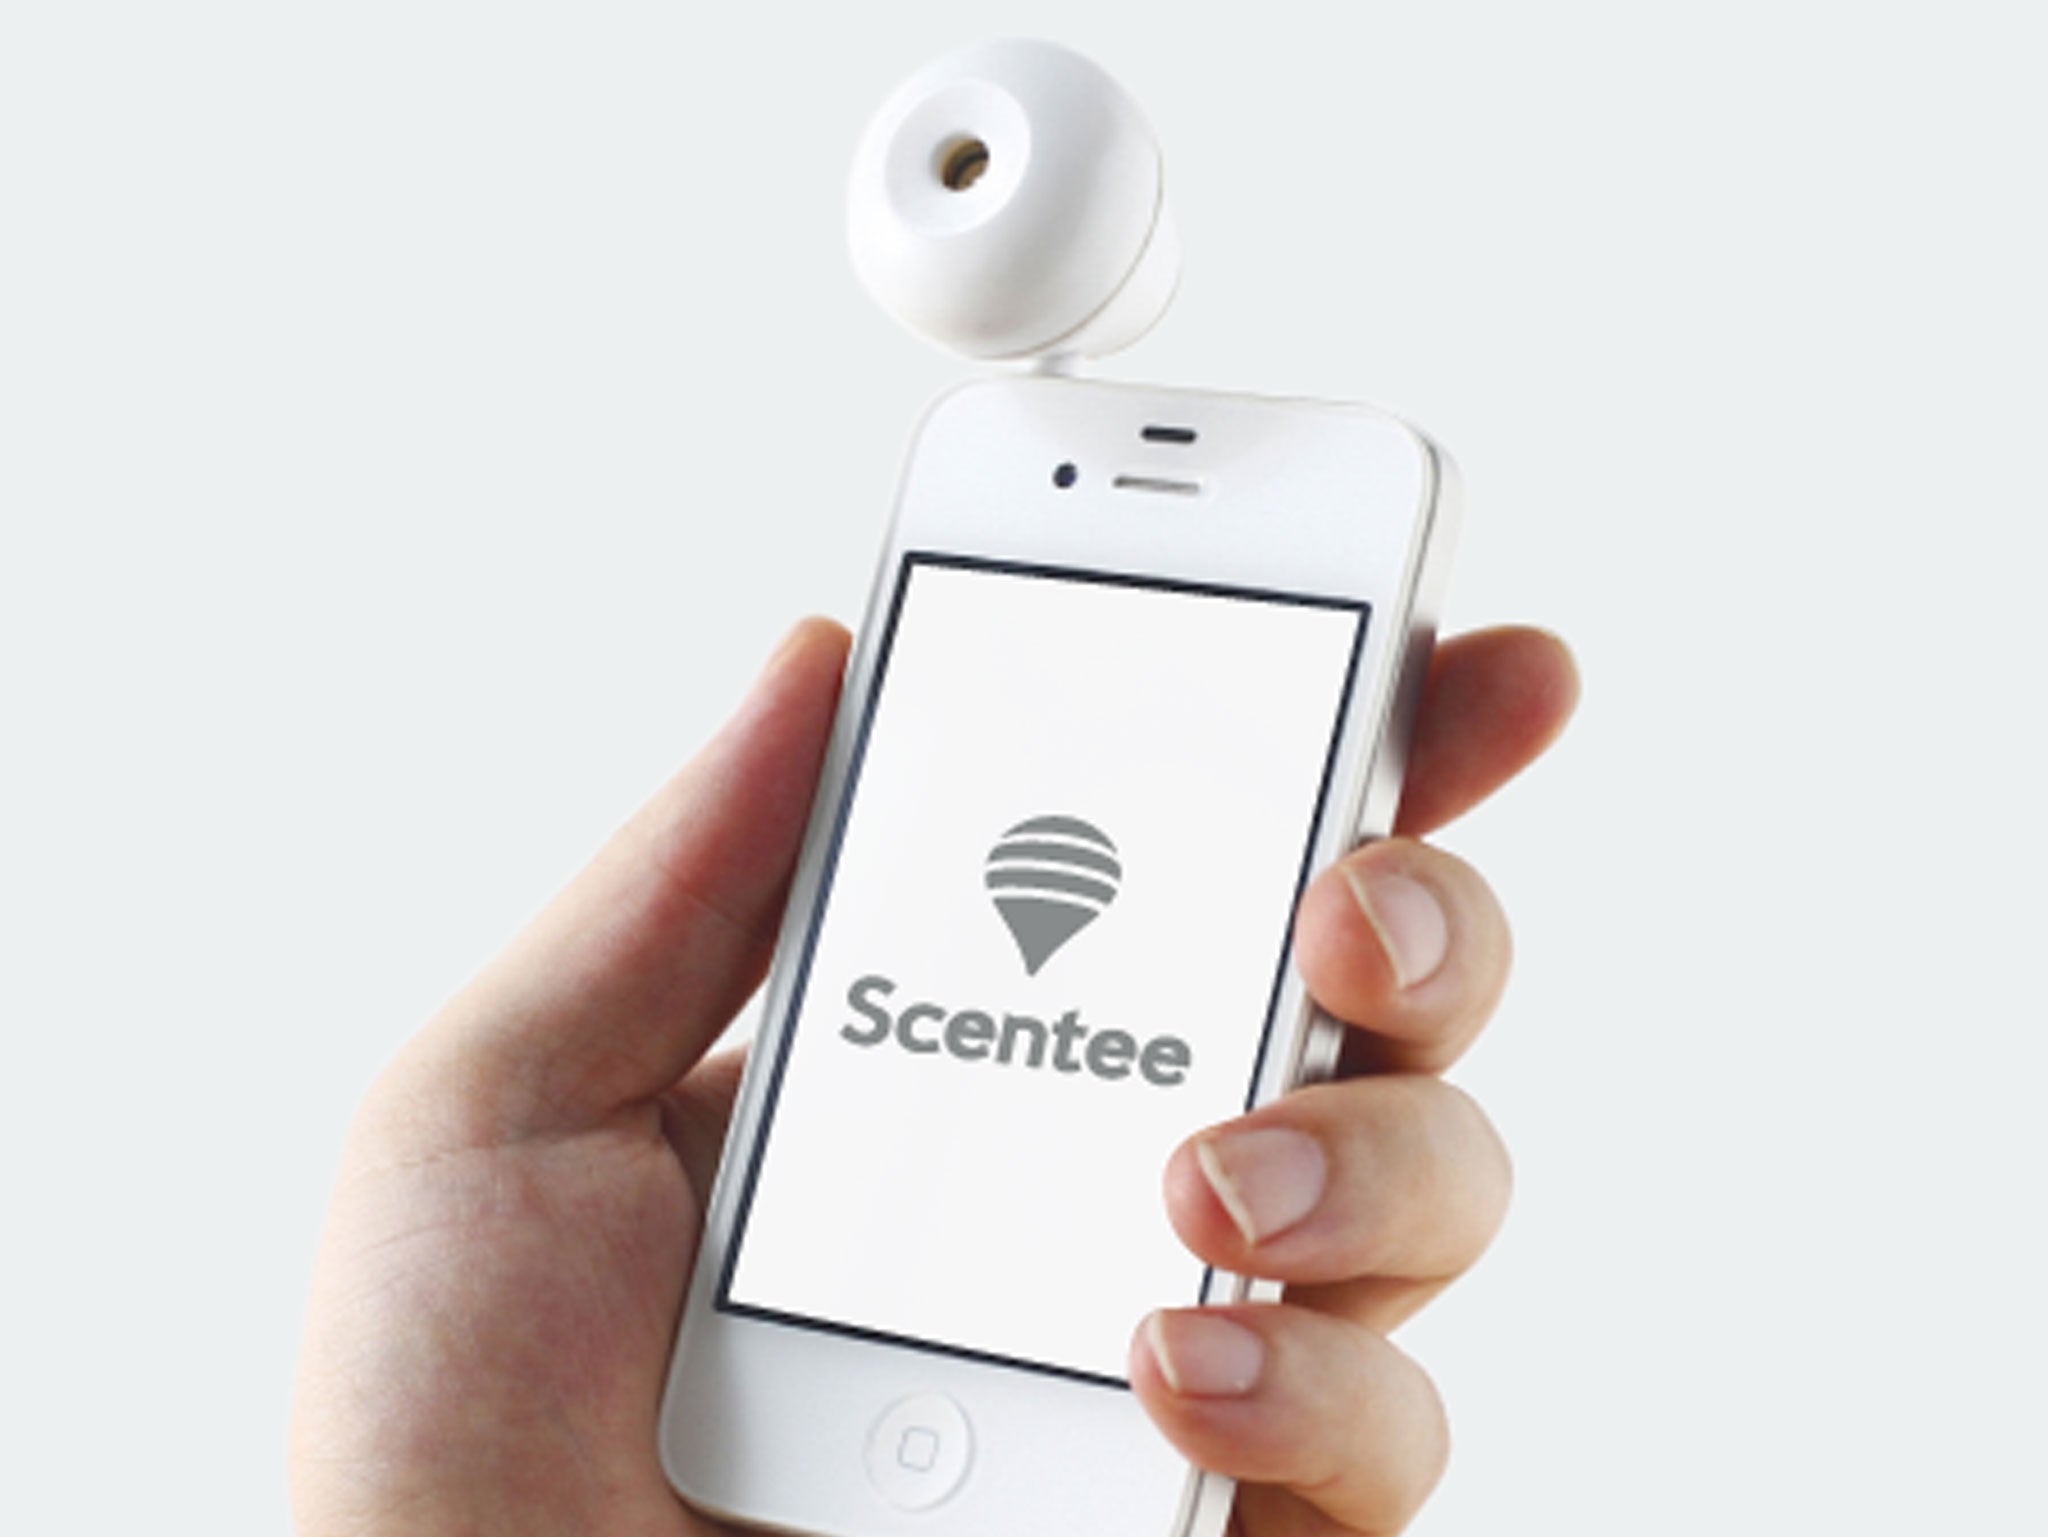 The Scentee 'balloon' plugs into the audio jack on your iOS or Android device, releasing fragrances in a timely and completely normal manner.